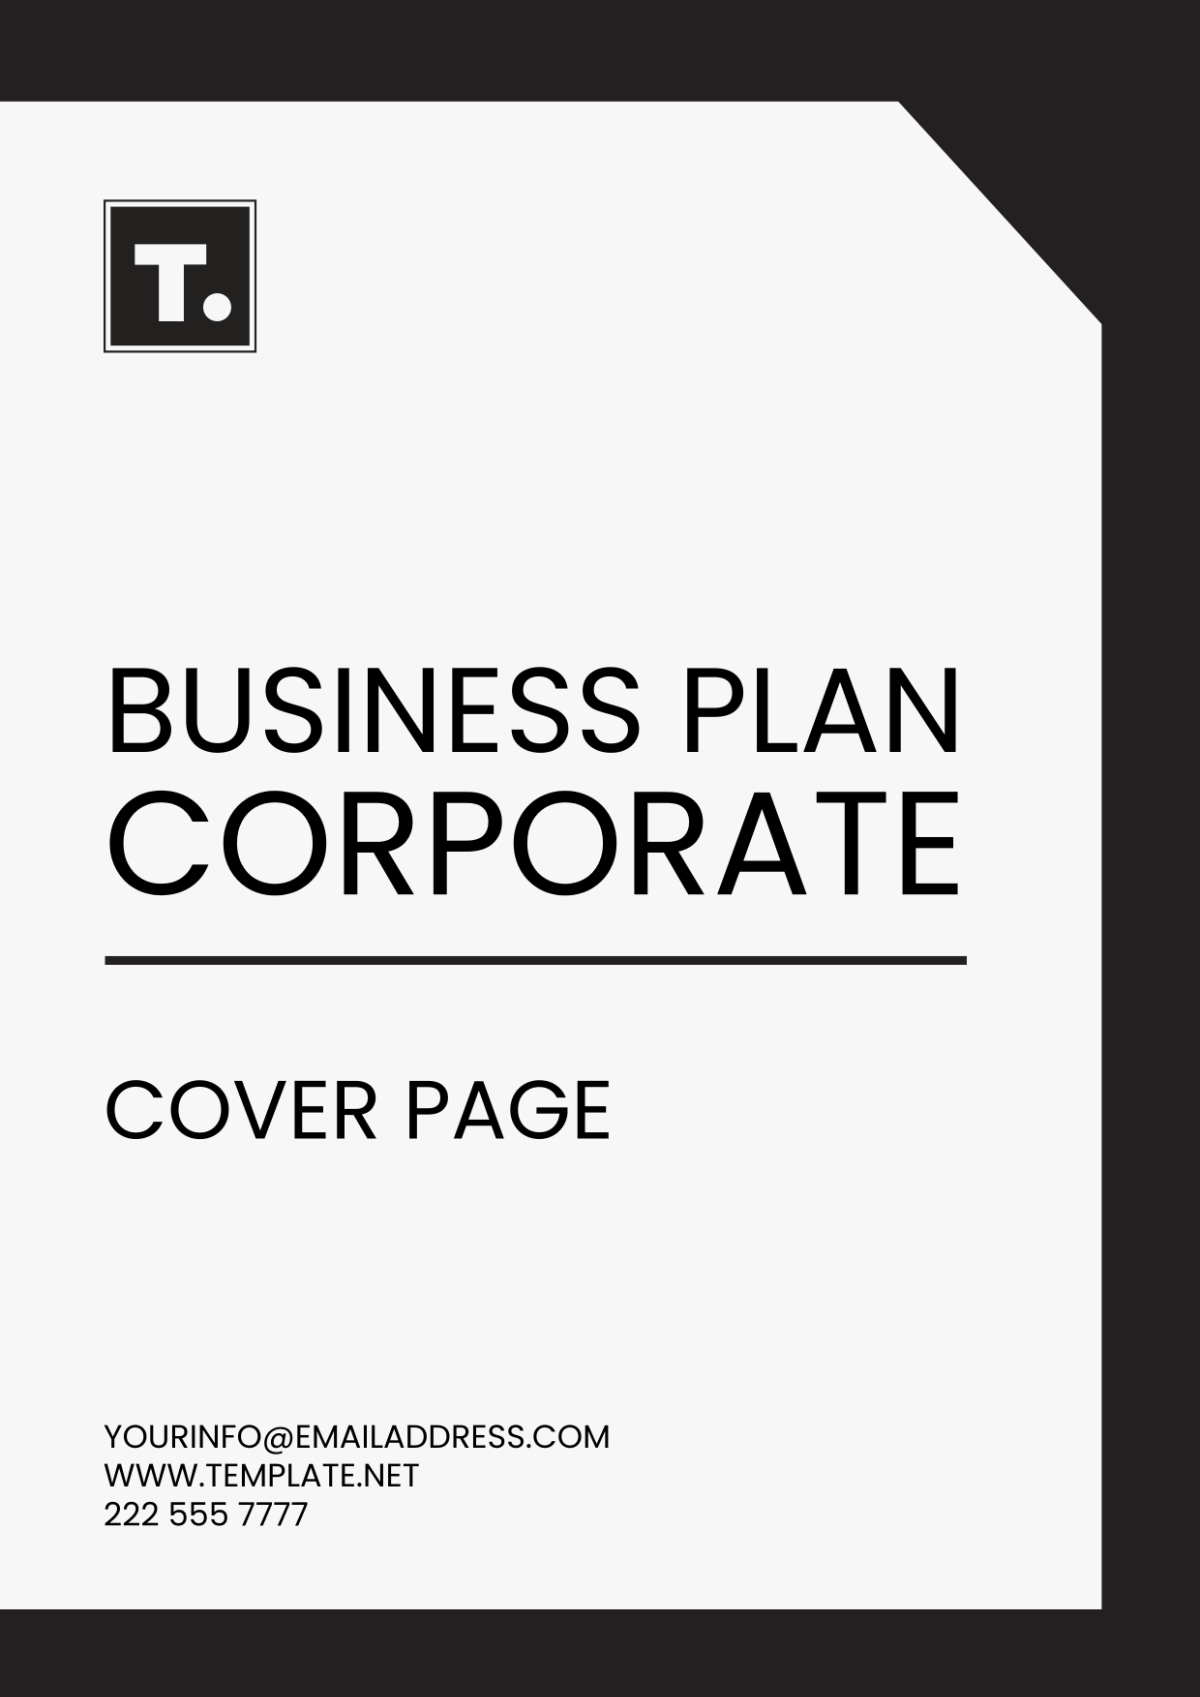 Free Business Plan Corporate Cover Page Template